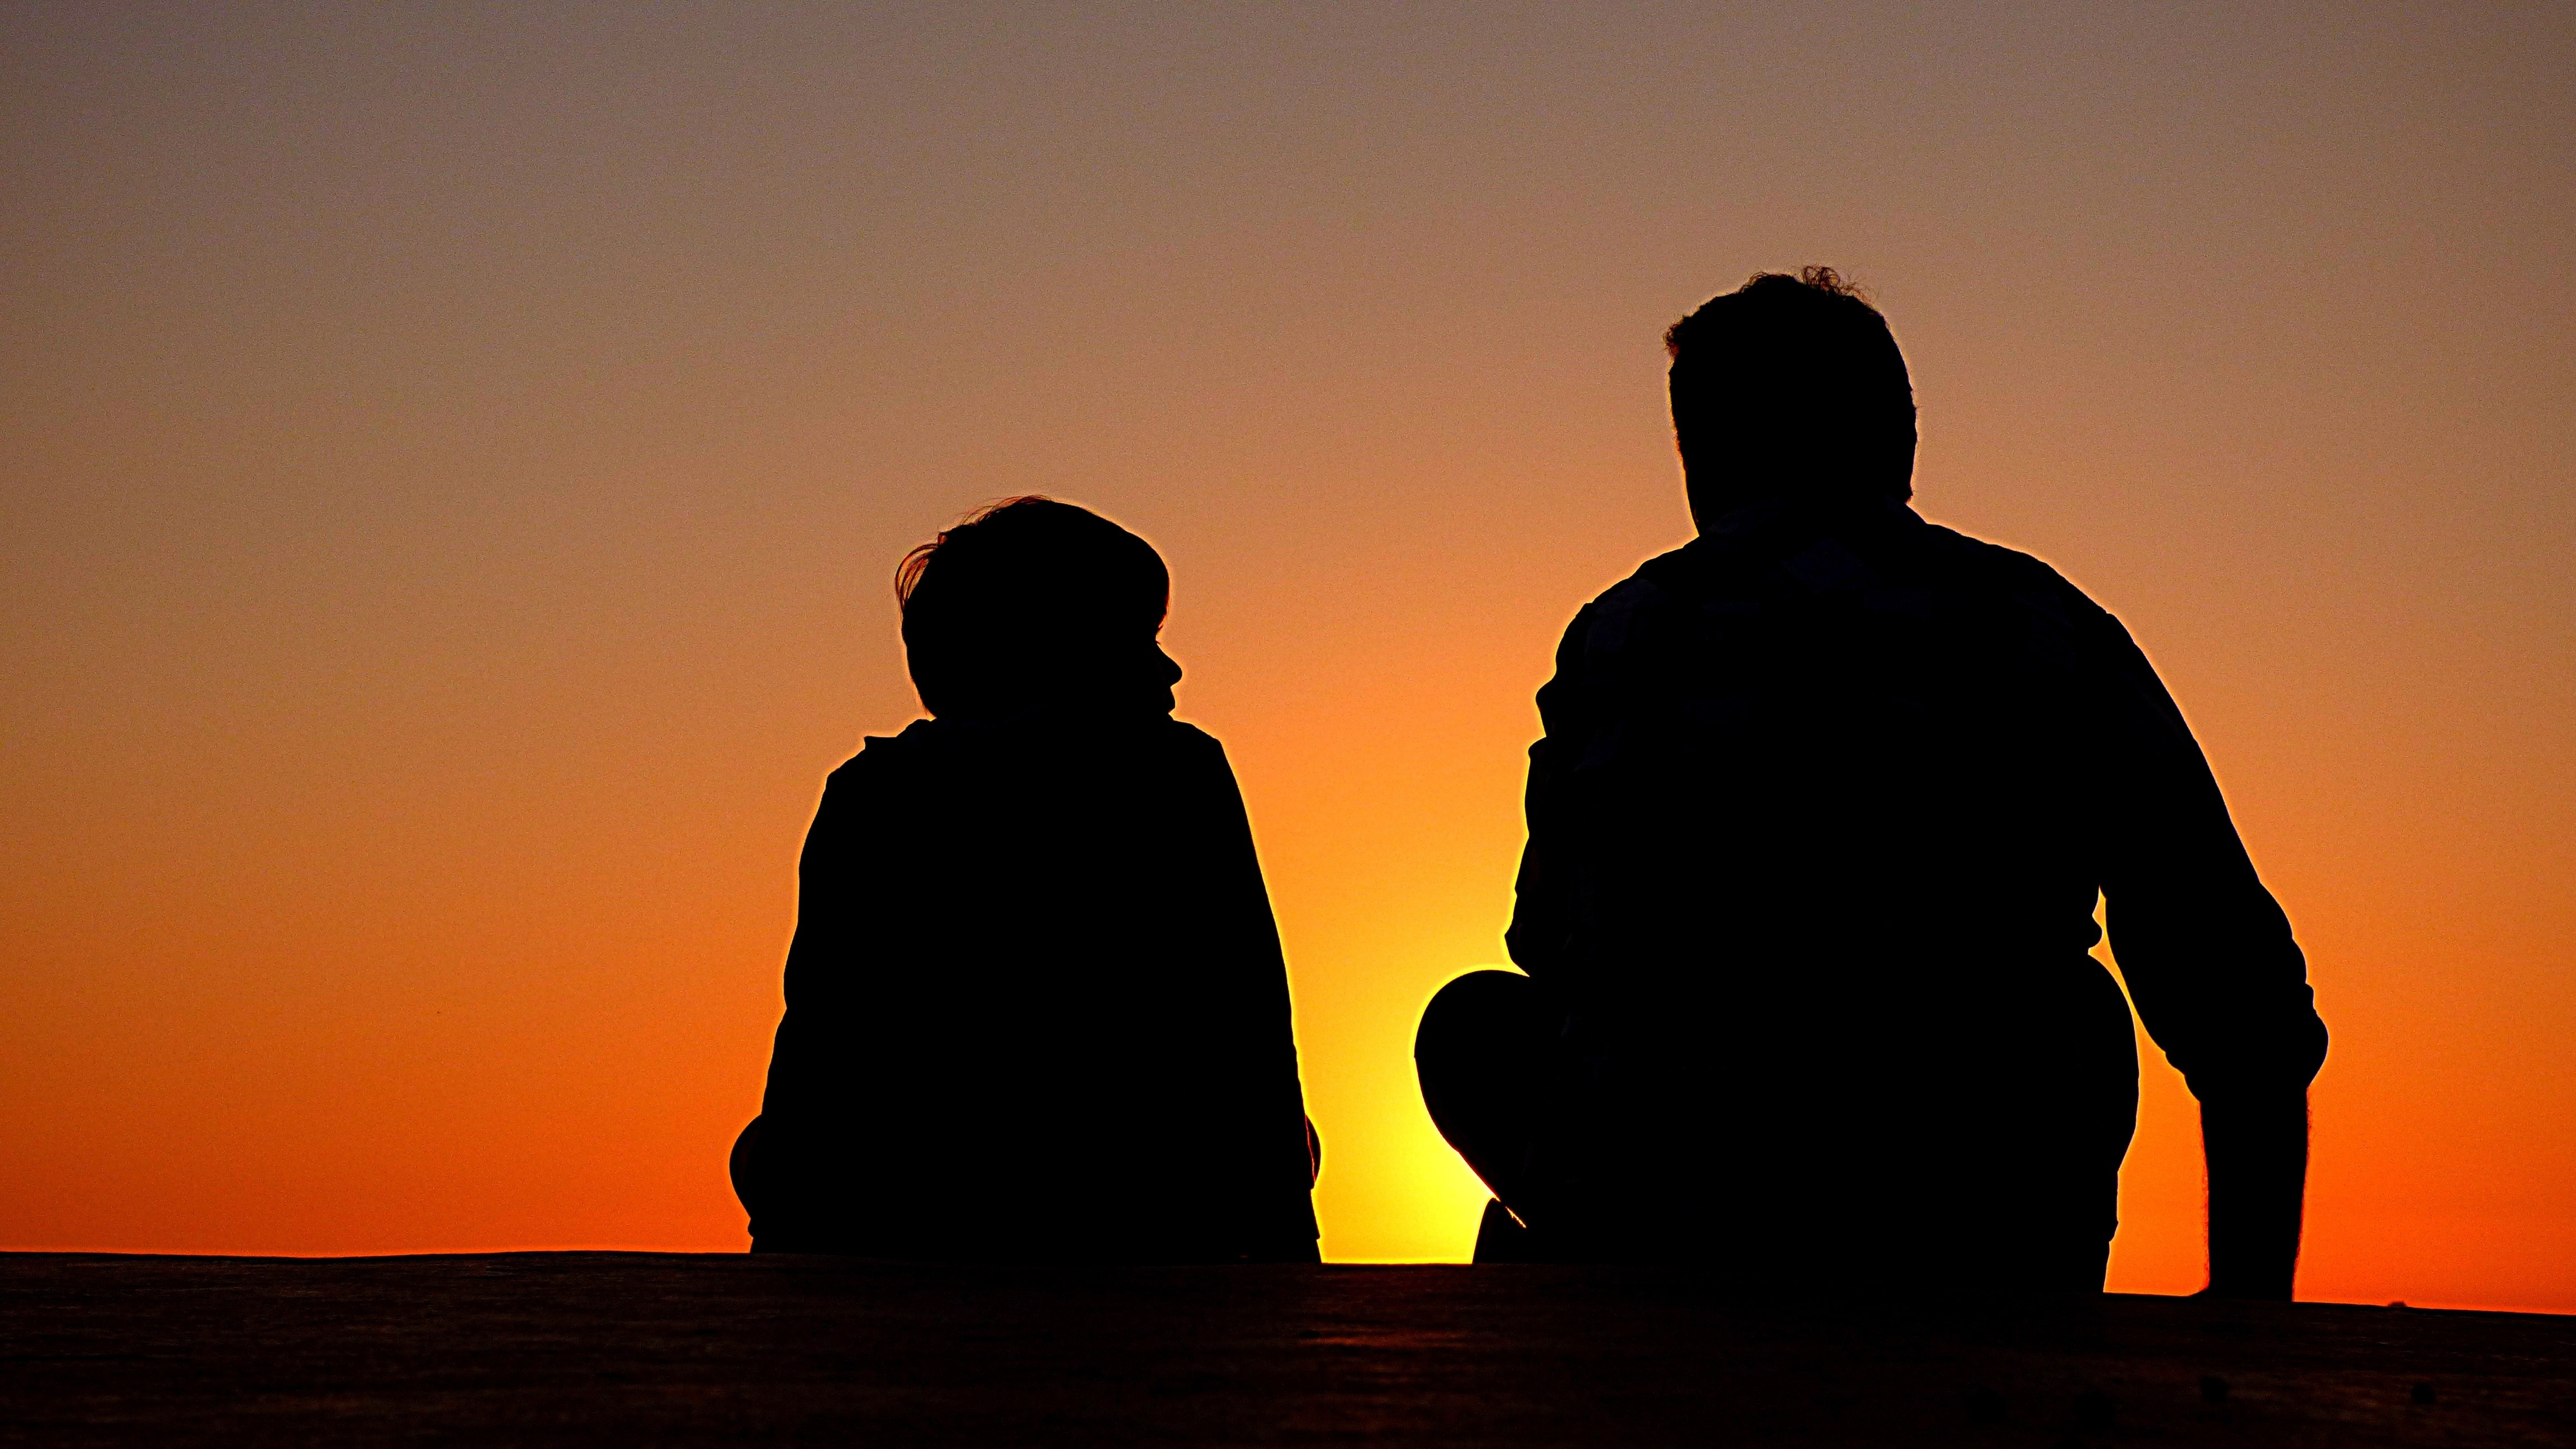 silhouette of boy and man sitting facing sunset